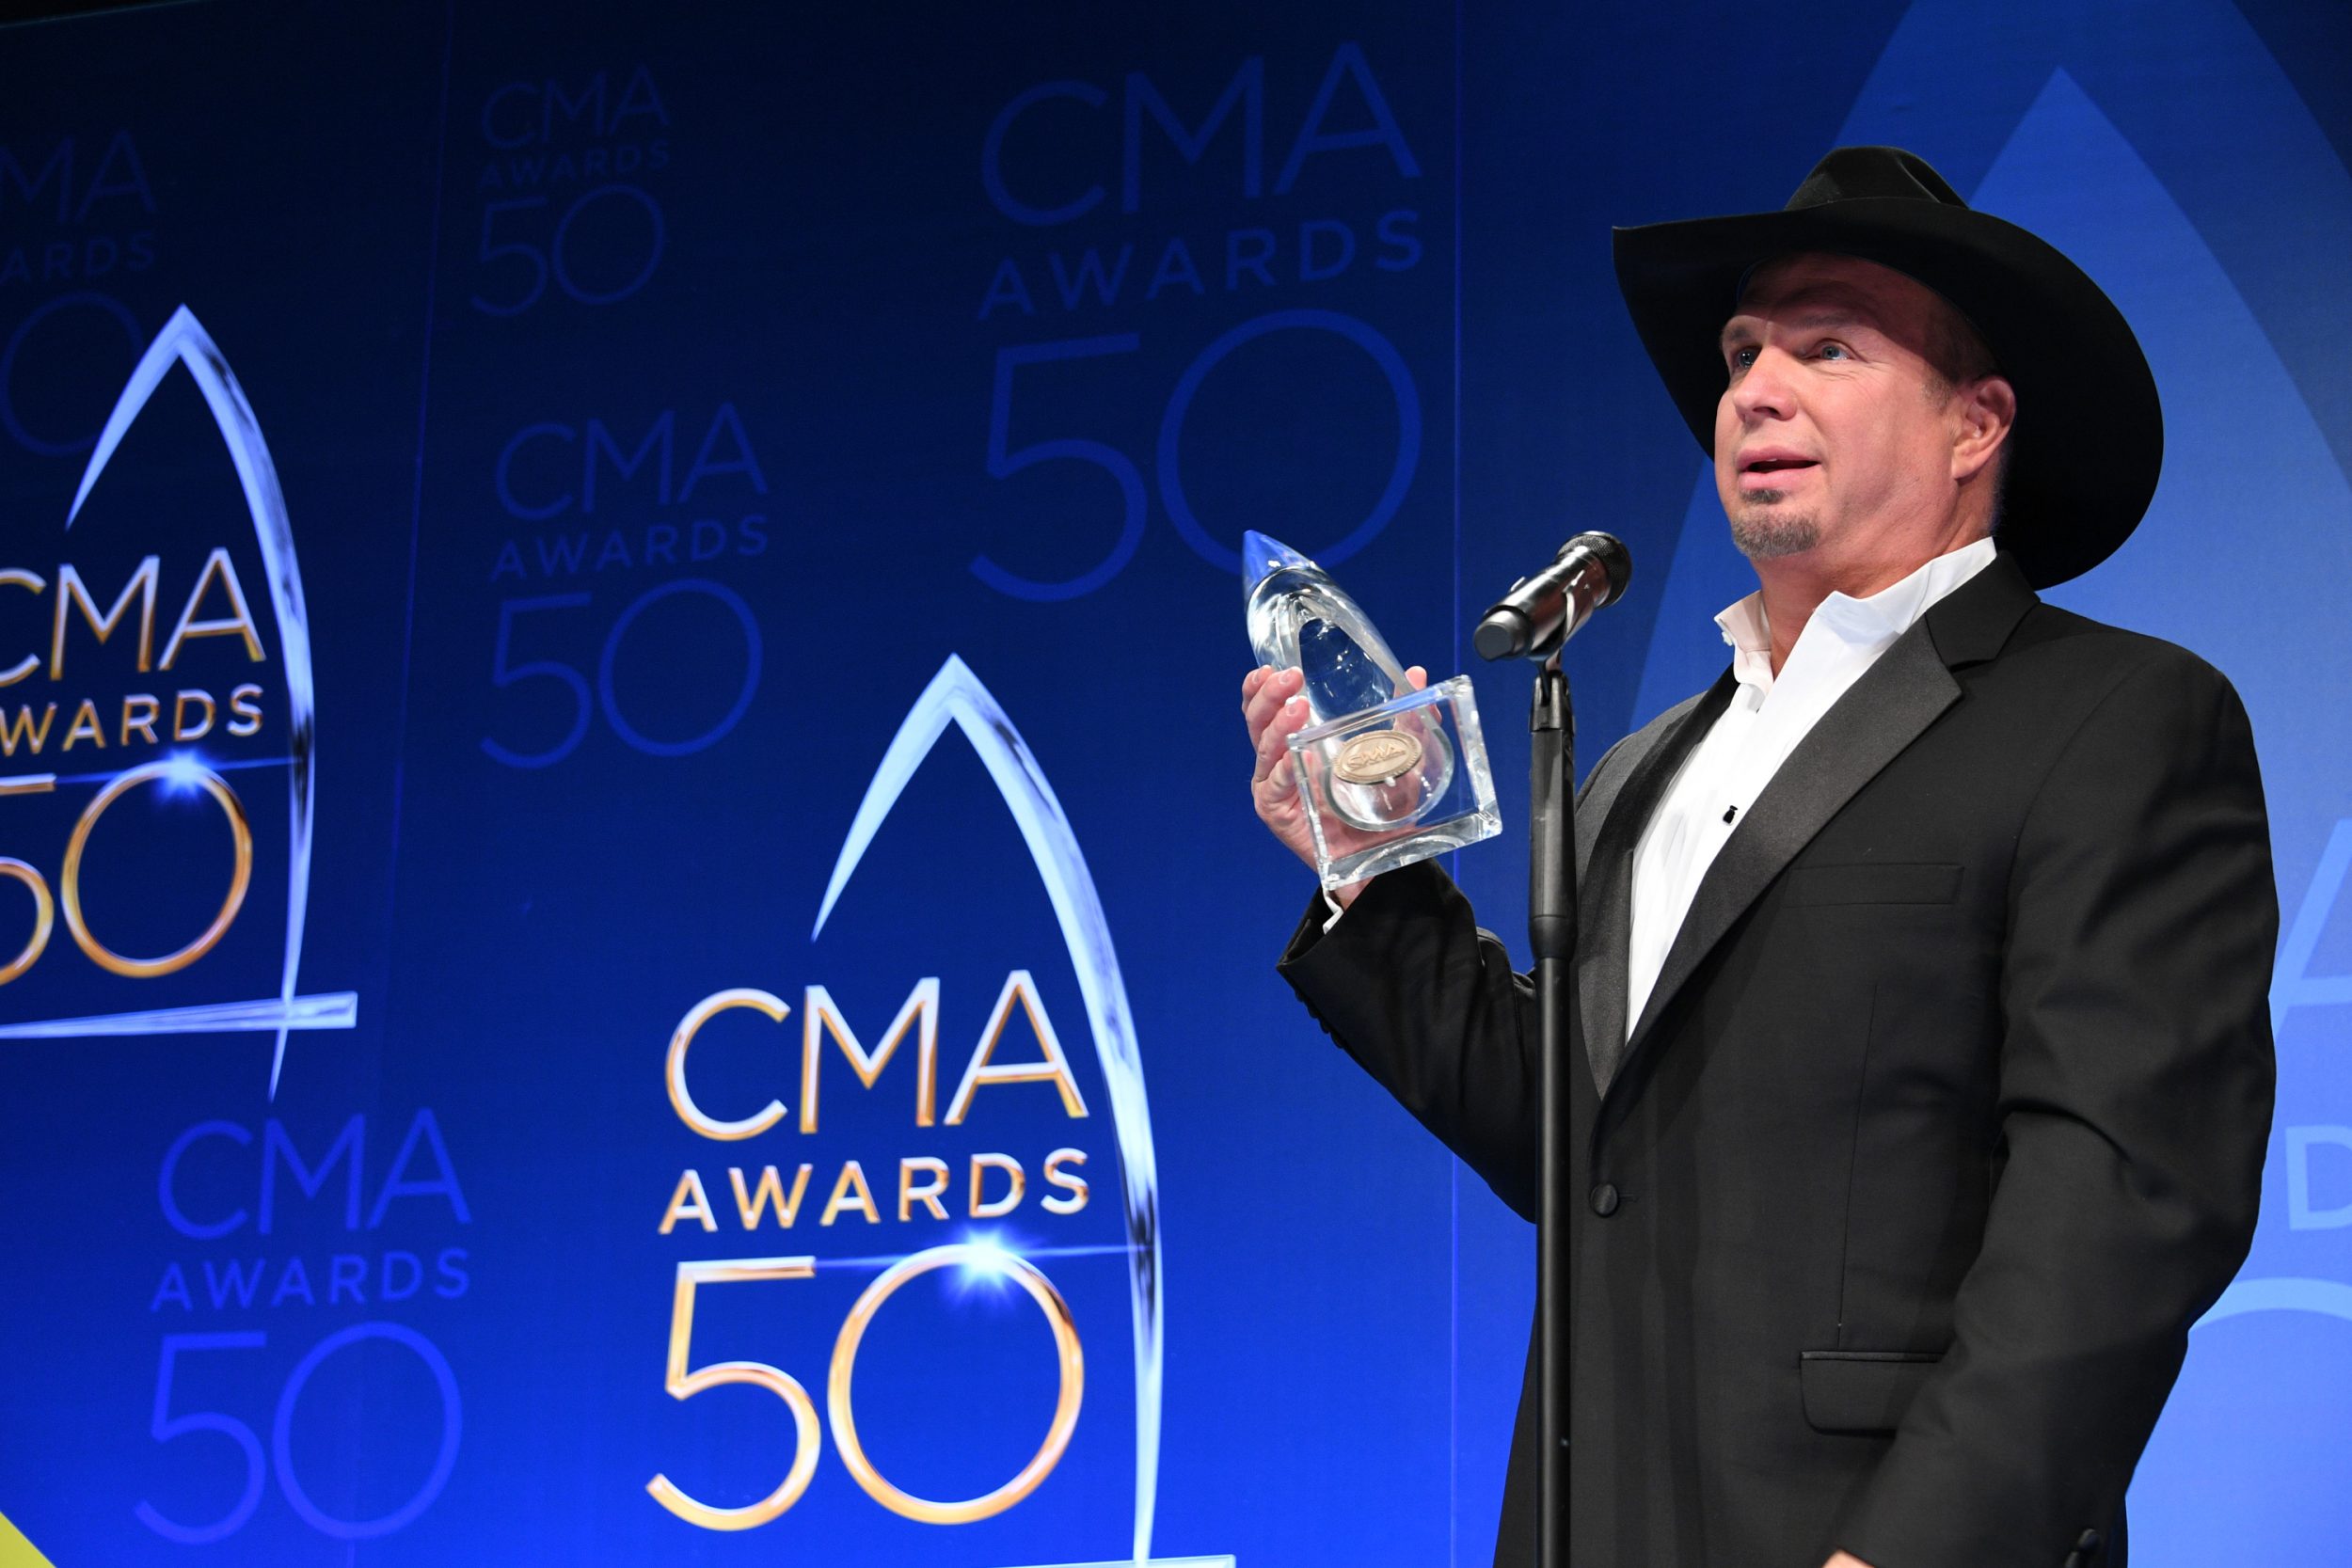 THE 50th ANNUAL CMA AWARDS - ÒThe 50th Annual CMA Awards,Ó hosted by Brad Paisley and Carrie Underwood, broadcasts live from the Bridgestone Arena in Nashville, Wednesday, November 2 (8:00-11:00 p.m. EDT), on the ABC Television Network. (ABC/Brett Oronzio) GARTH BROOKS